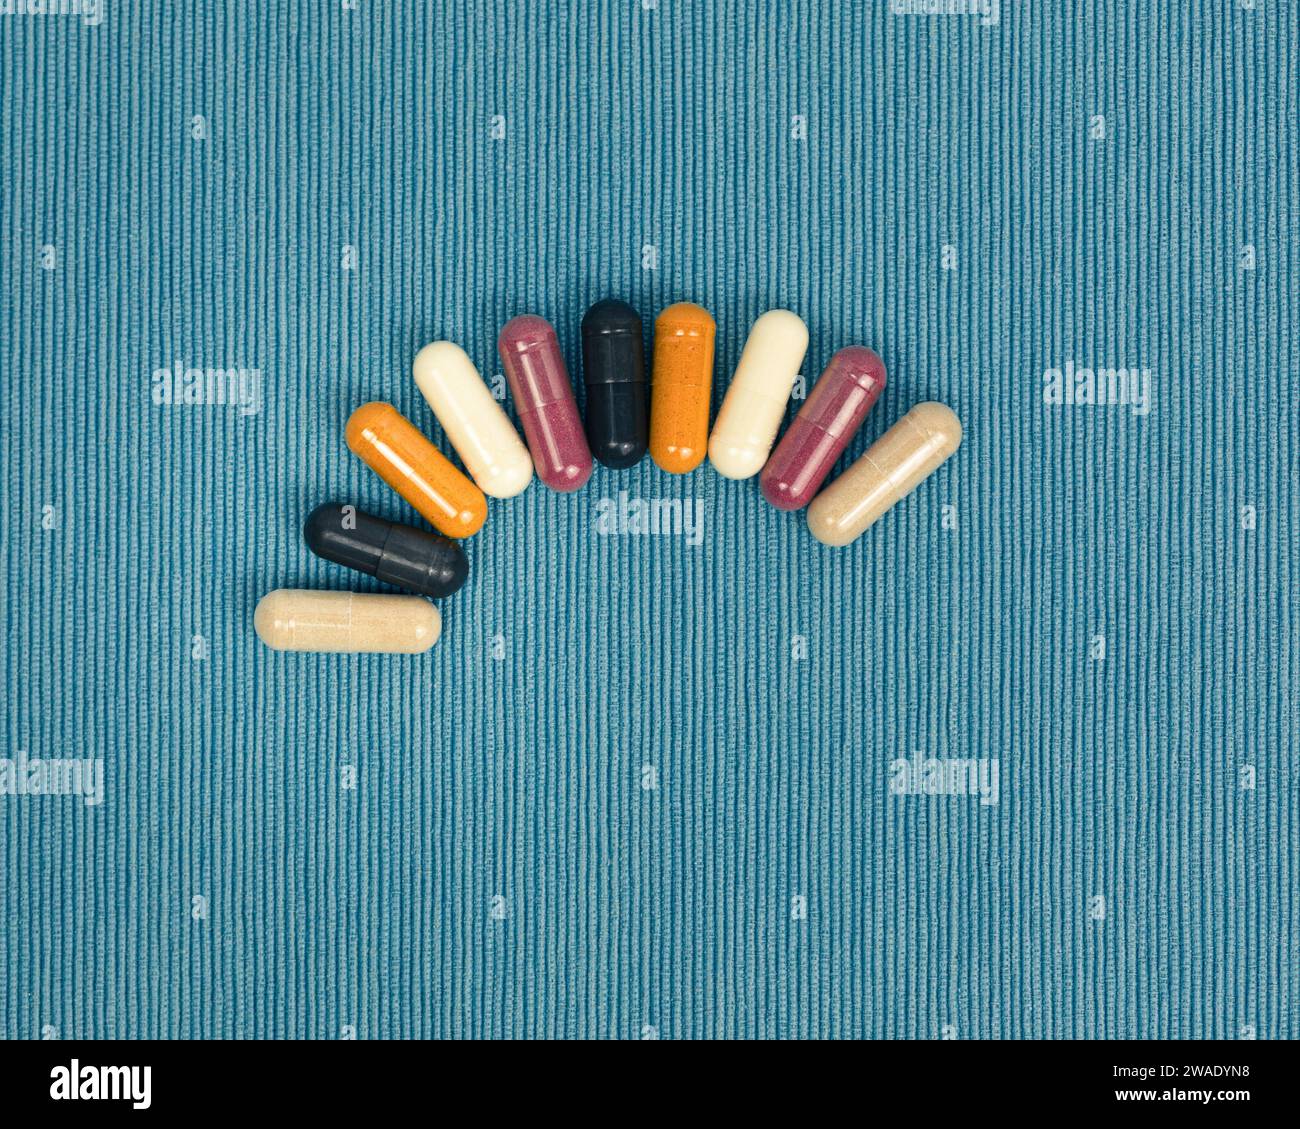 Top view of a variety of vitamin and mineral supplements in capsules. Multicolored pills in orange and red on a blue textured background. Stock Photo